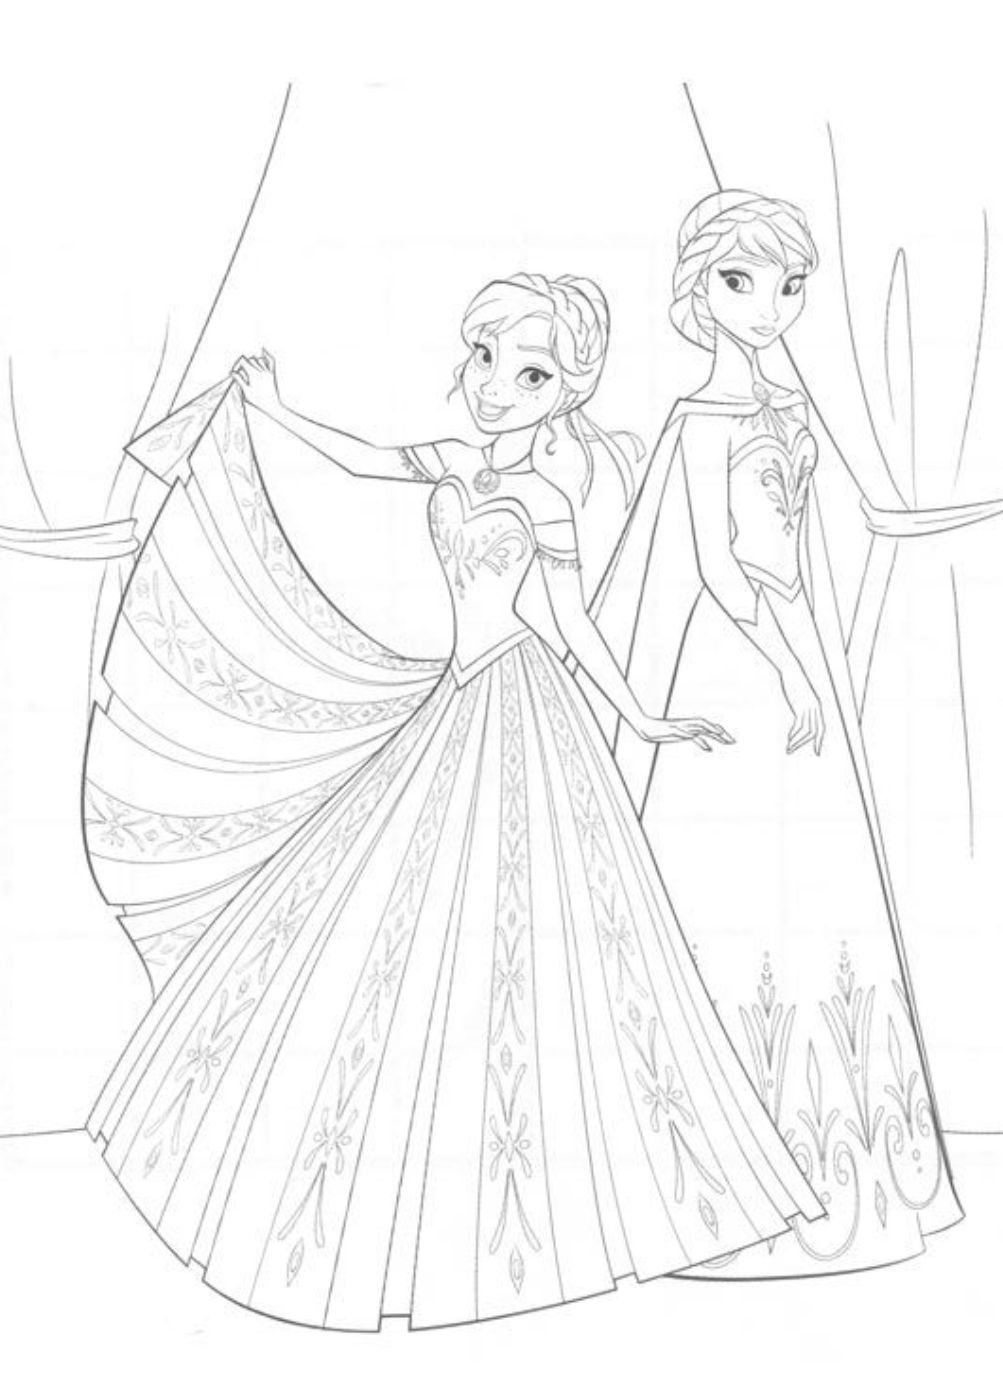 Princess Frozen Coloring Page | Cartoon Coloring pages of ...